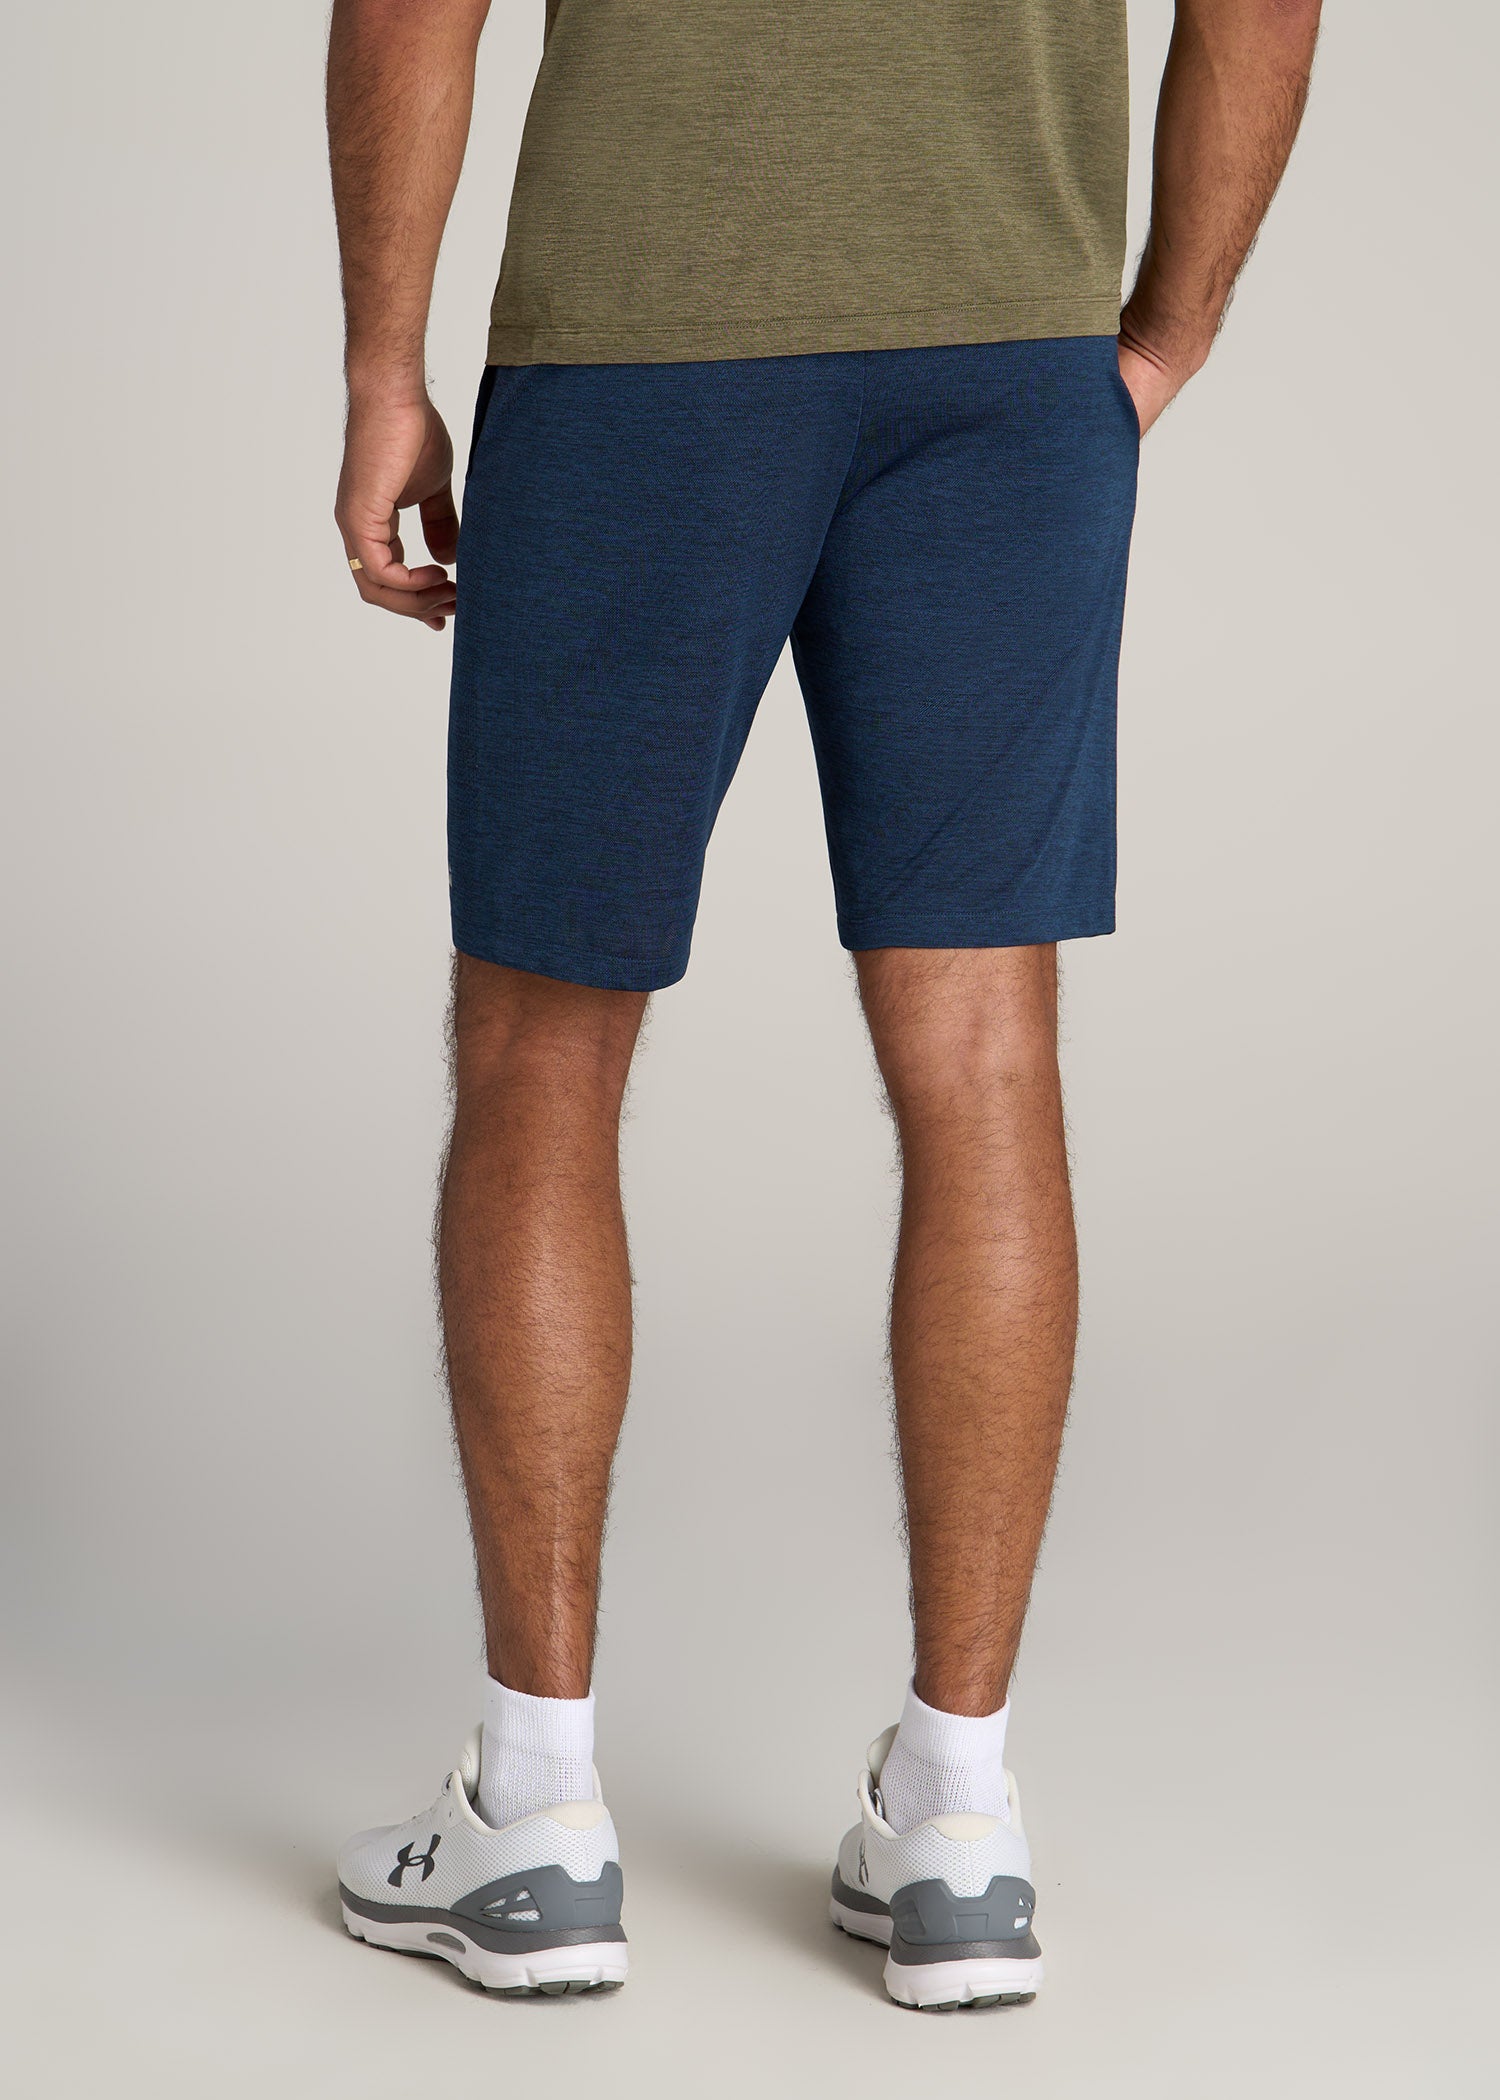 American-Tall-Men-AT-Performance-Engineered-Athletic-Shorts-Navy-Mix-back